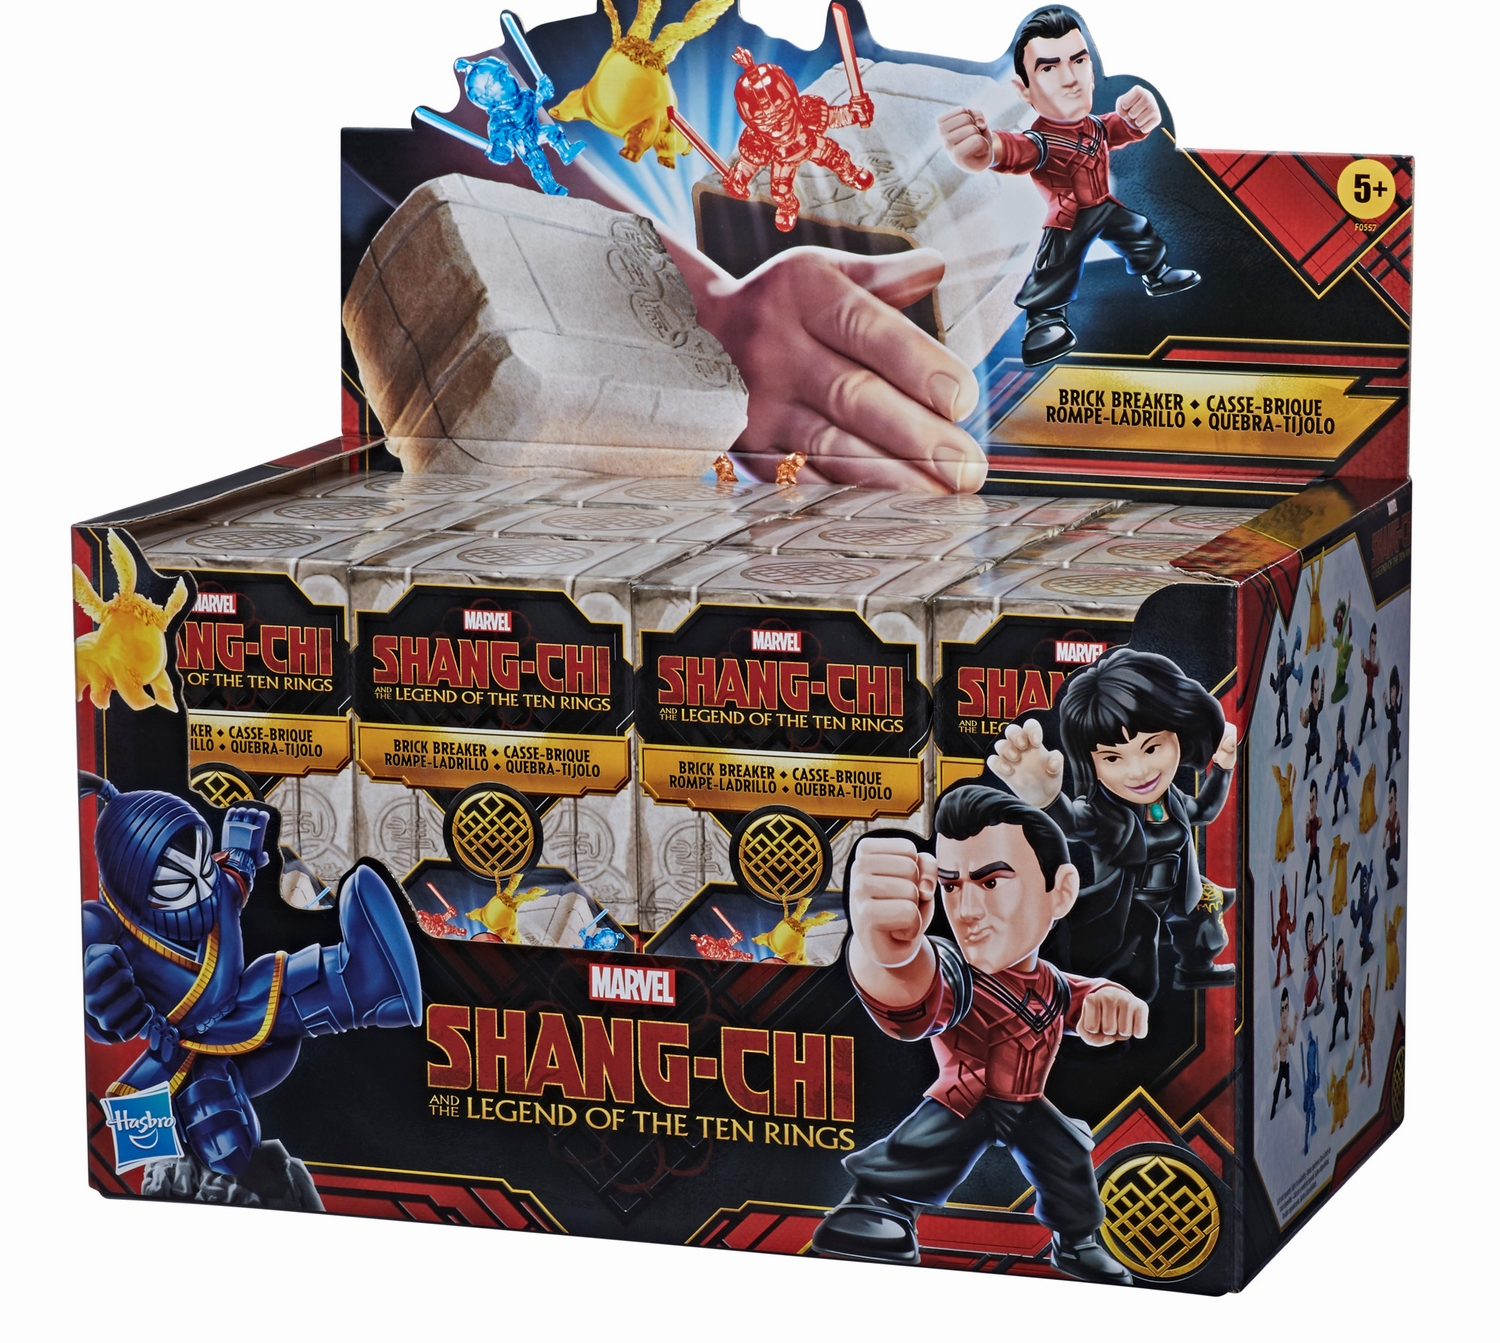 MARVEL SHANG-CHI AND THE LEGEND OF THE TEN RINGS 2-INCH BRICK BREAKERS MINI-FIGURES - pckging (6).jpg